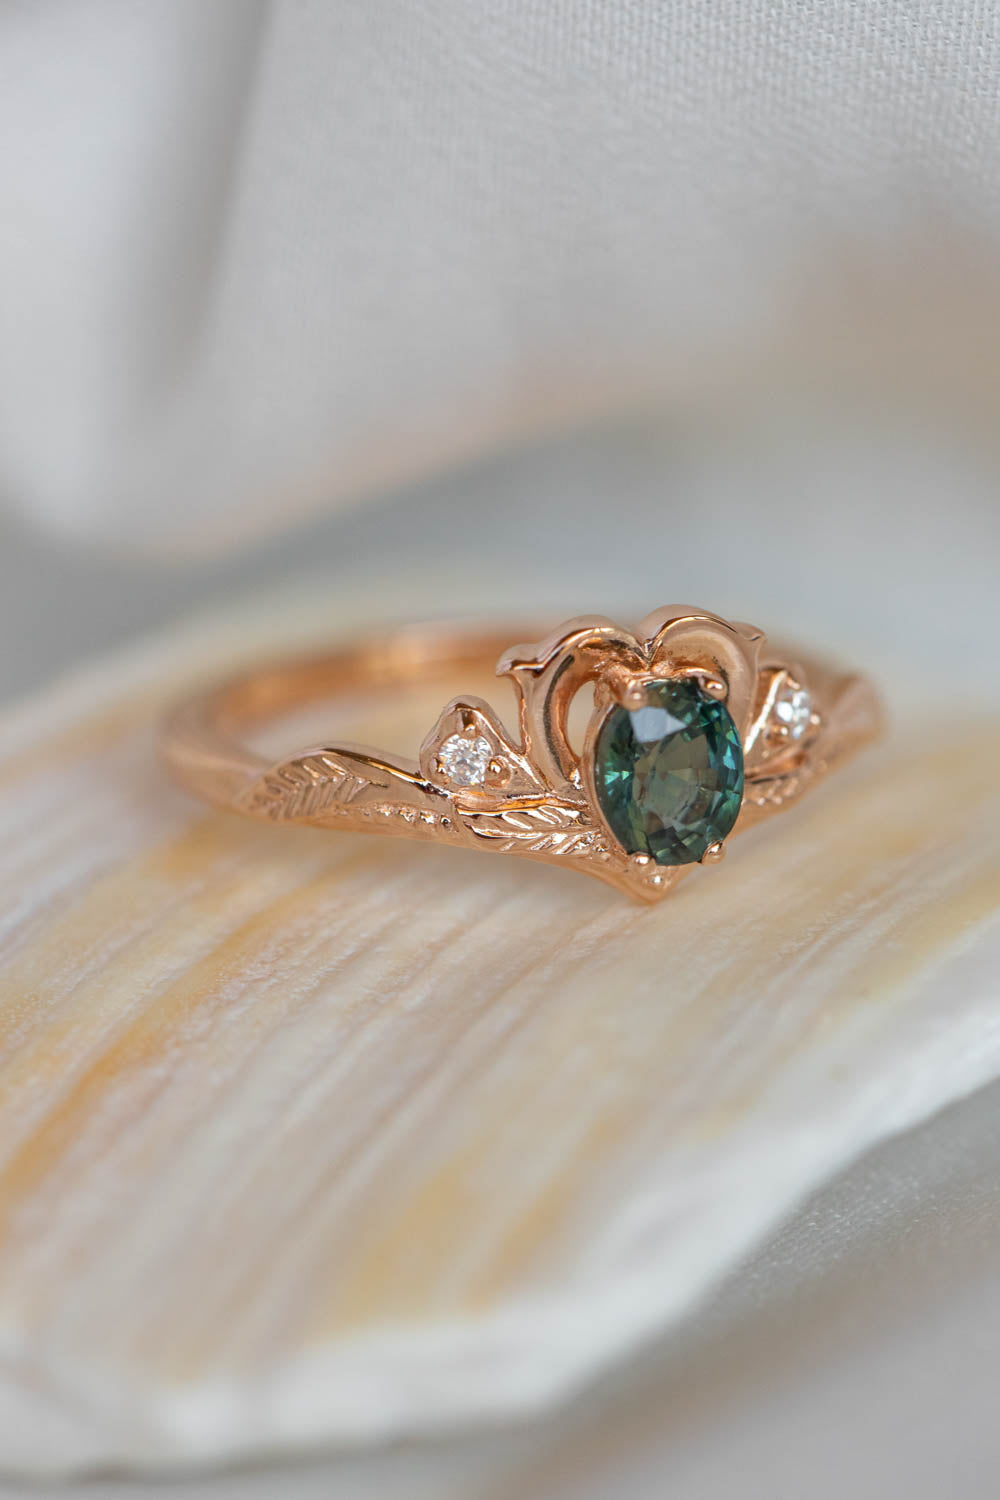 READY TO SHIP: Amura in 14K rose gold, natural oval cut teal sapphire 6.3x5.3 mm, moissanites, RING SIZE 7 US - Eden Garden Jewelry™